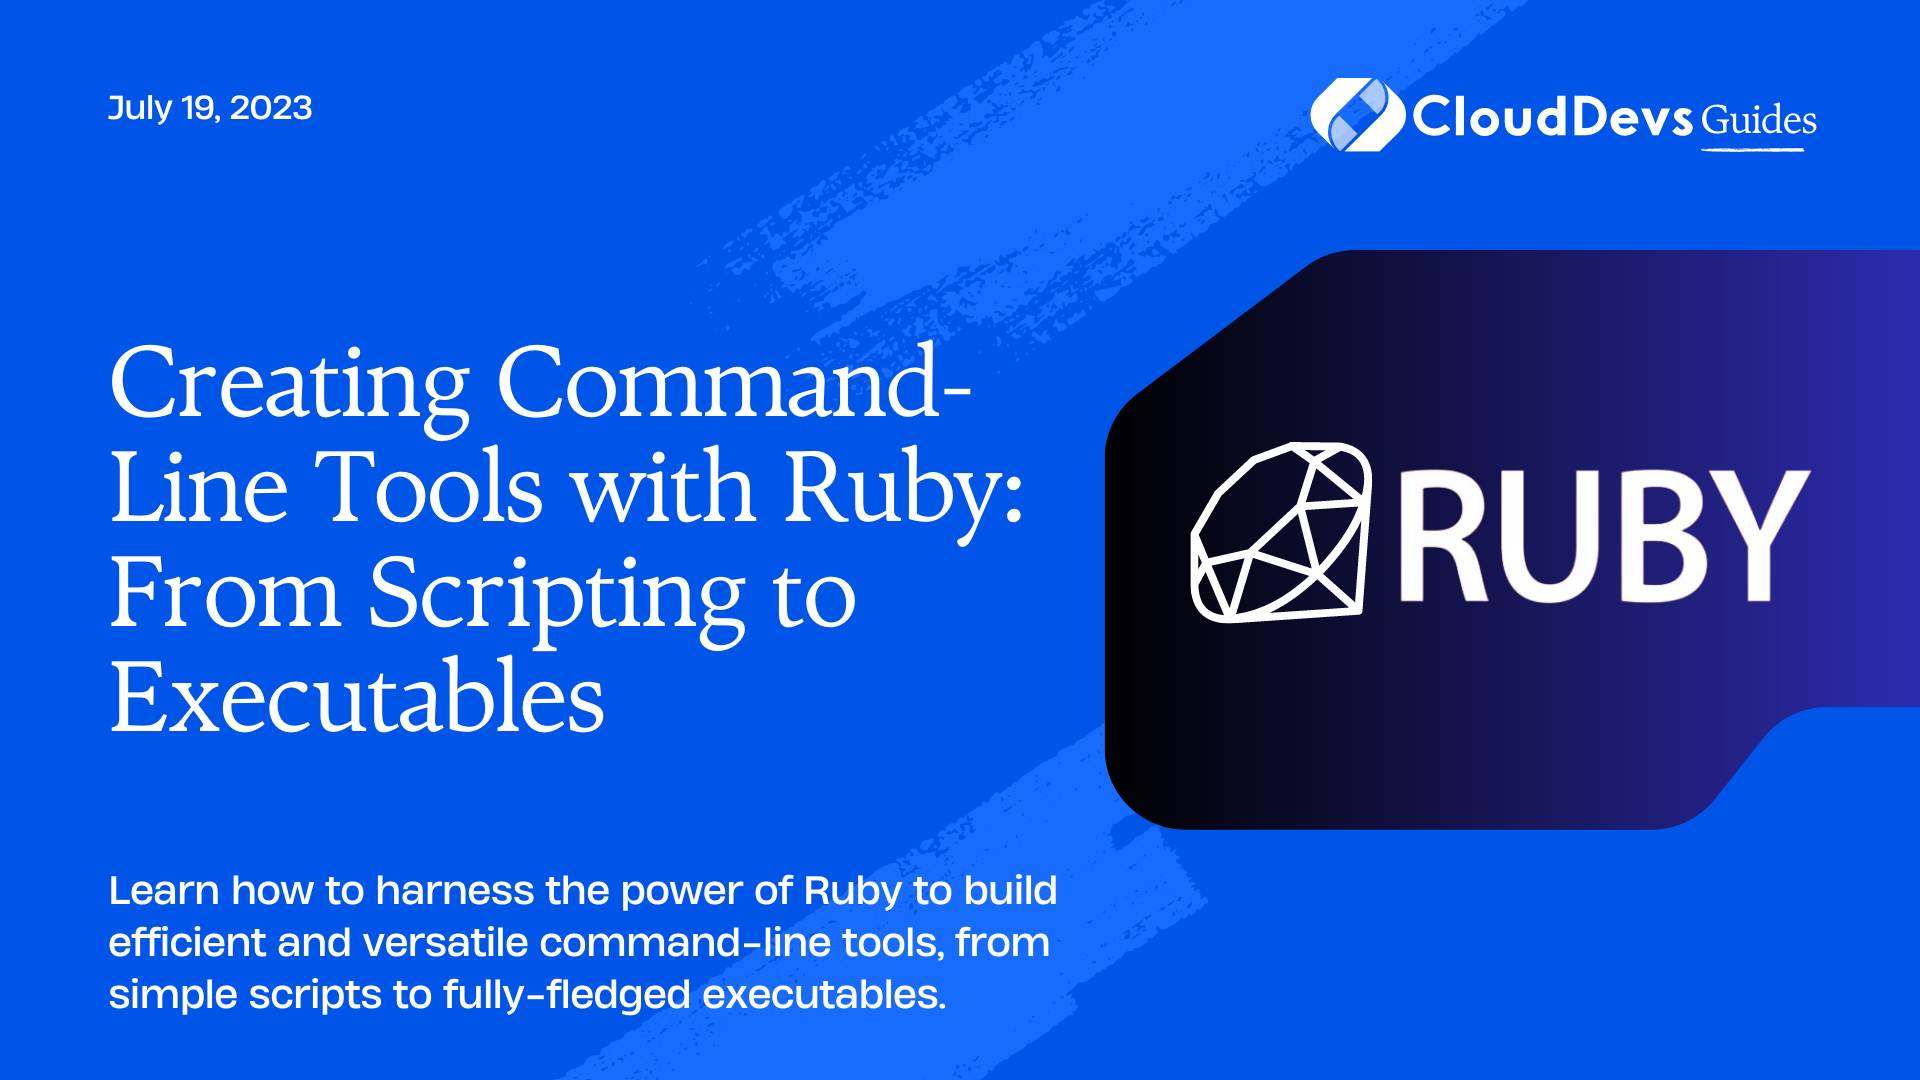 Creating Command-Line Tools with Ruby: From Scripting to Executables